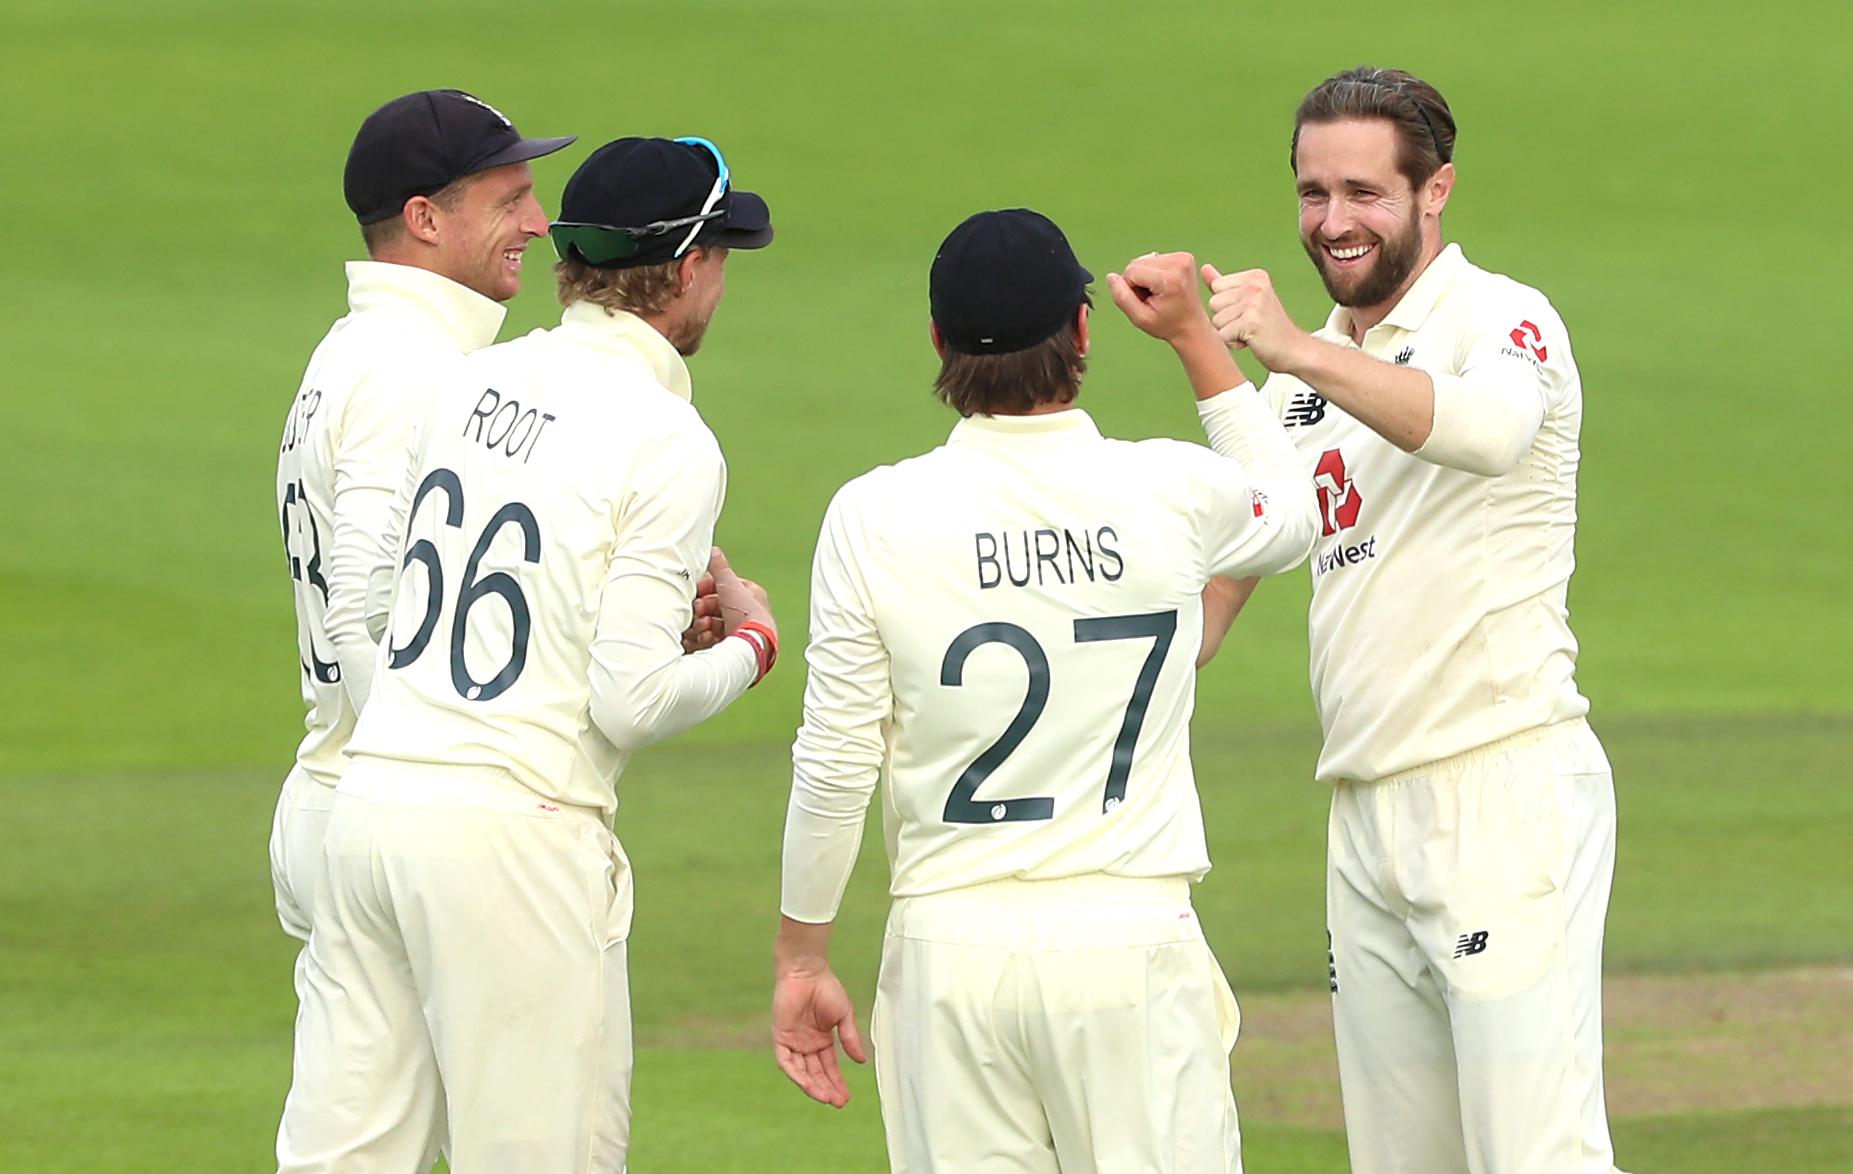 Woakes grabbed two important wickets to wrestle back some of the initiative